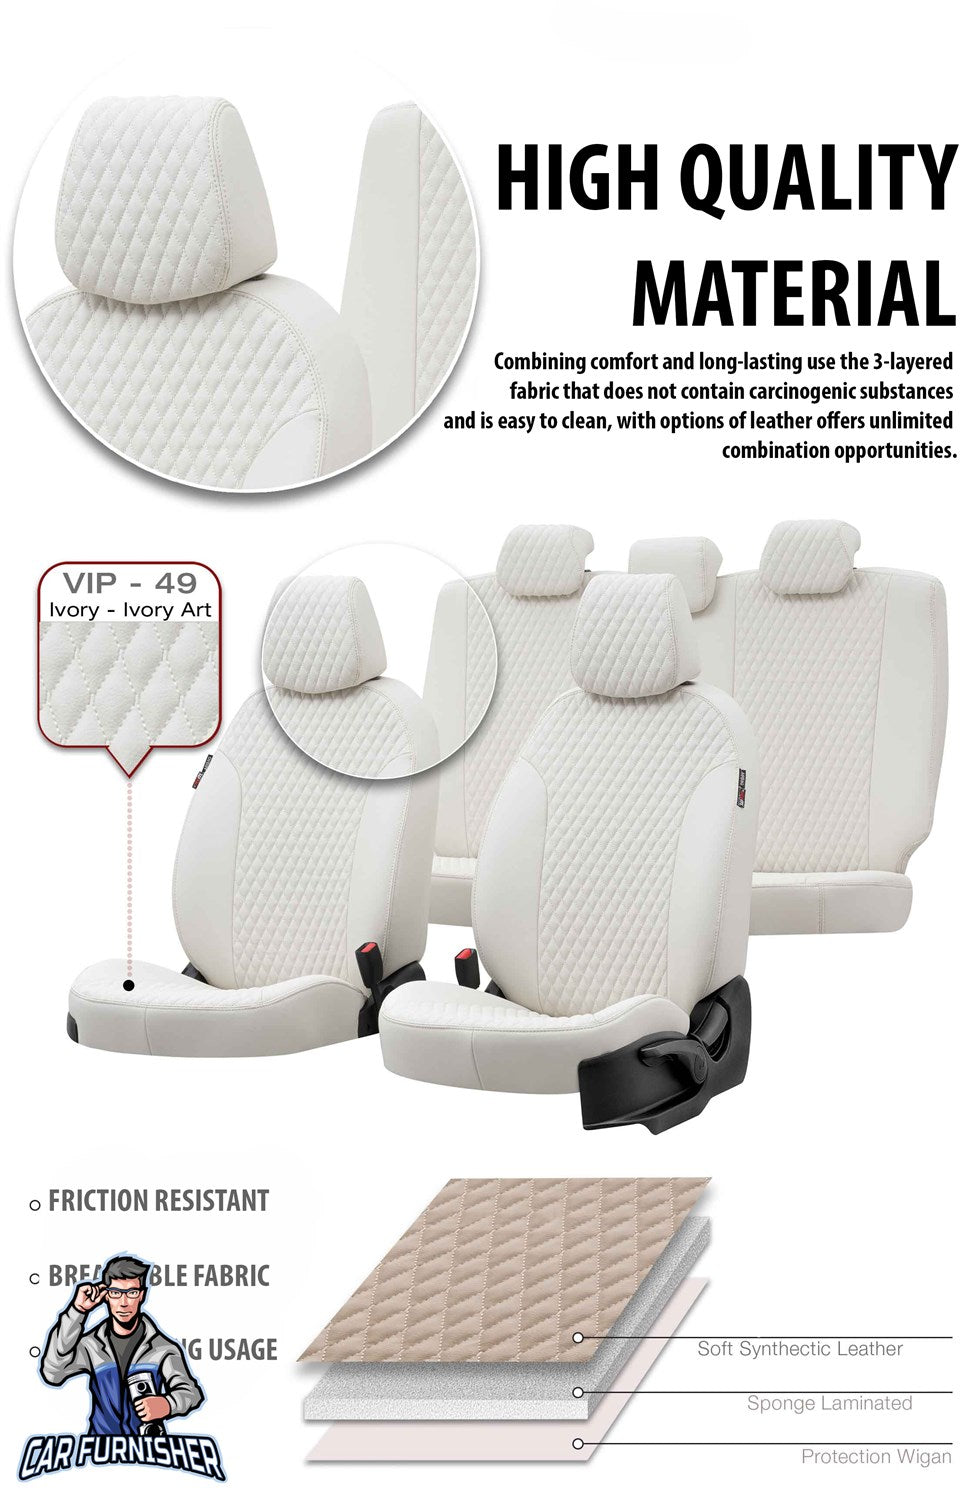 Honda City Seat Covers Amsterdam Leather Design Beige Leather